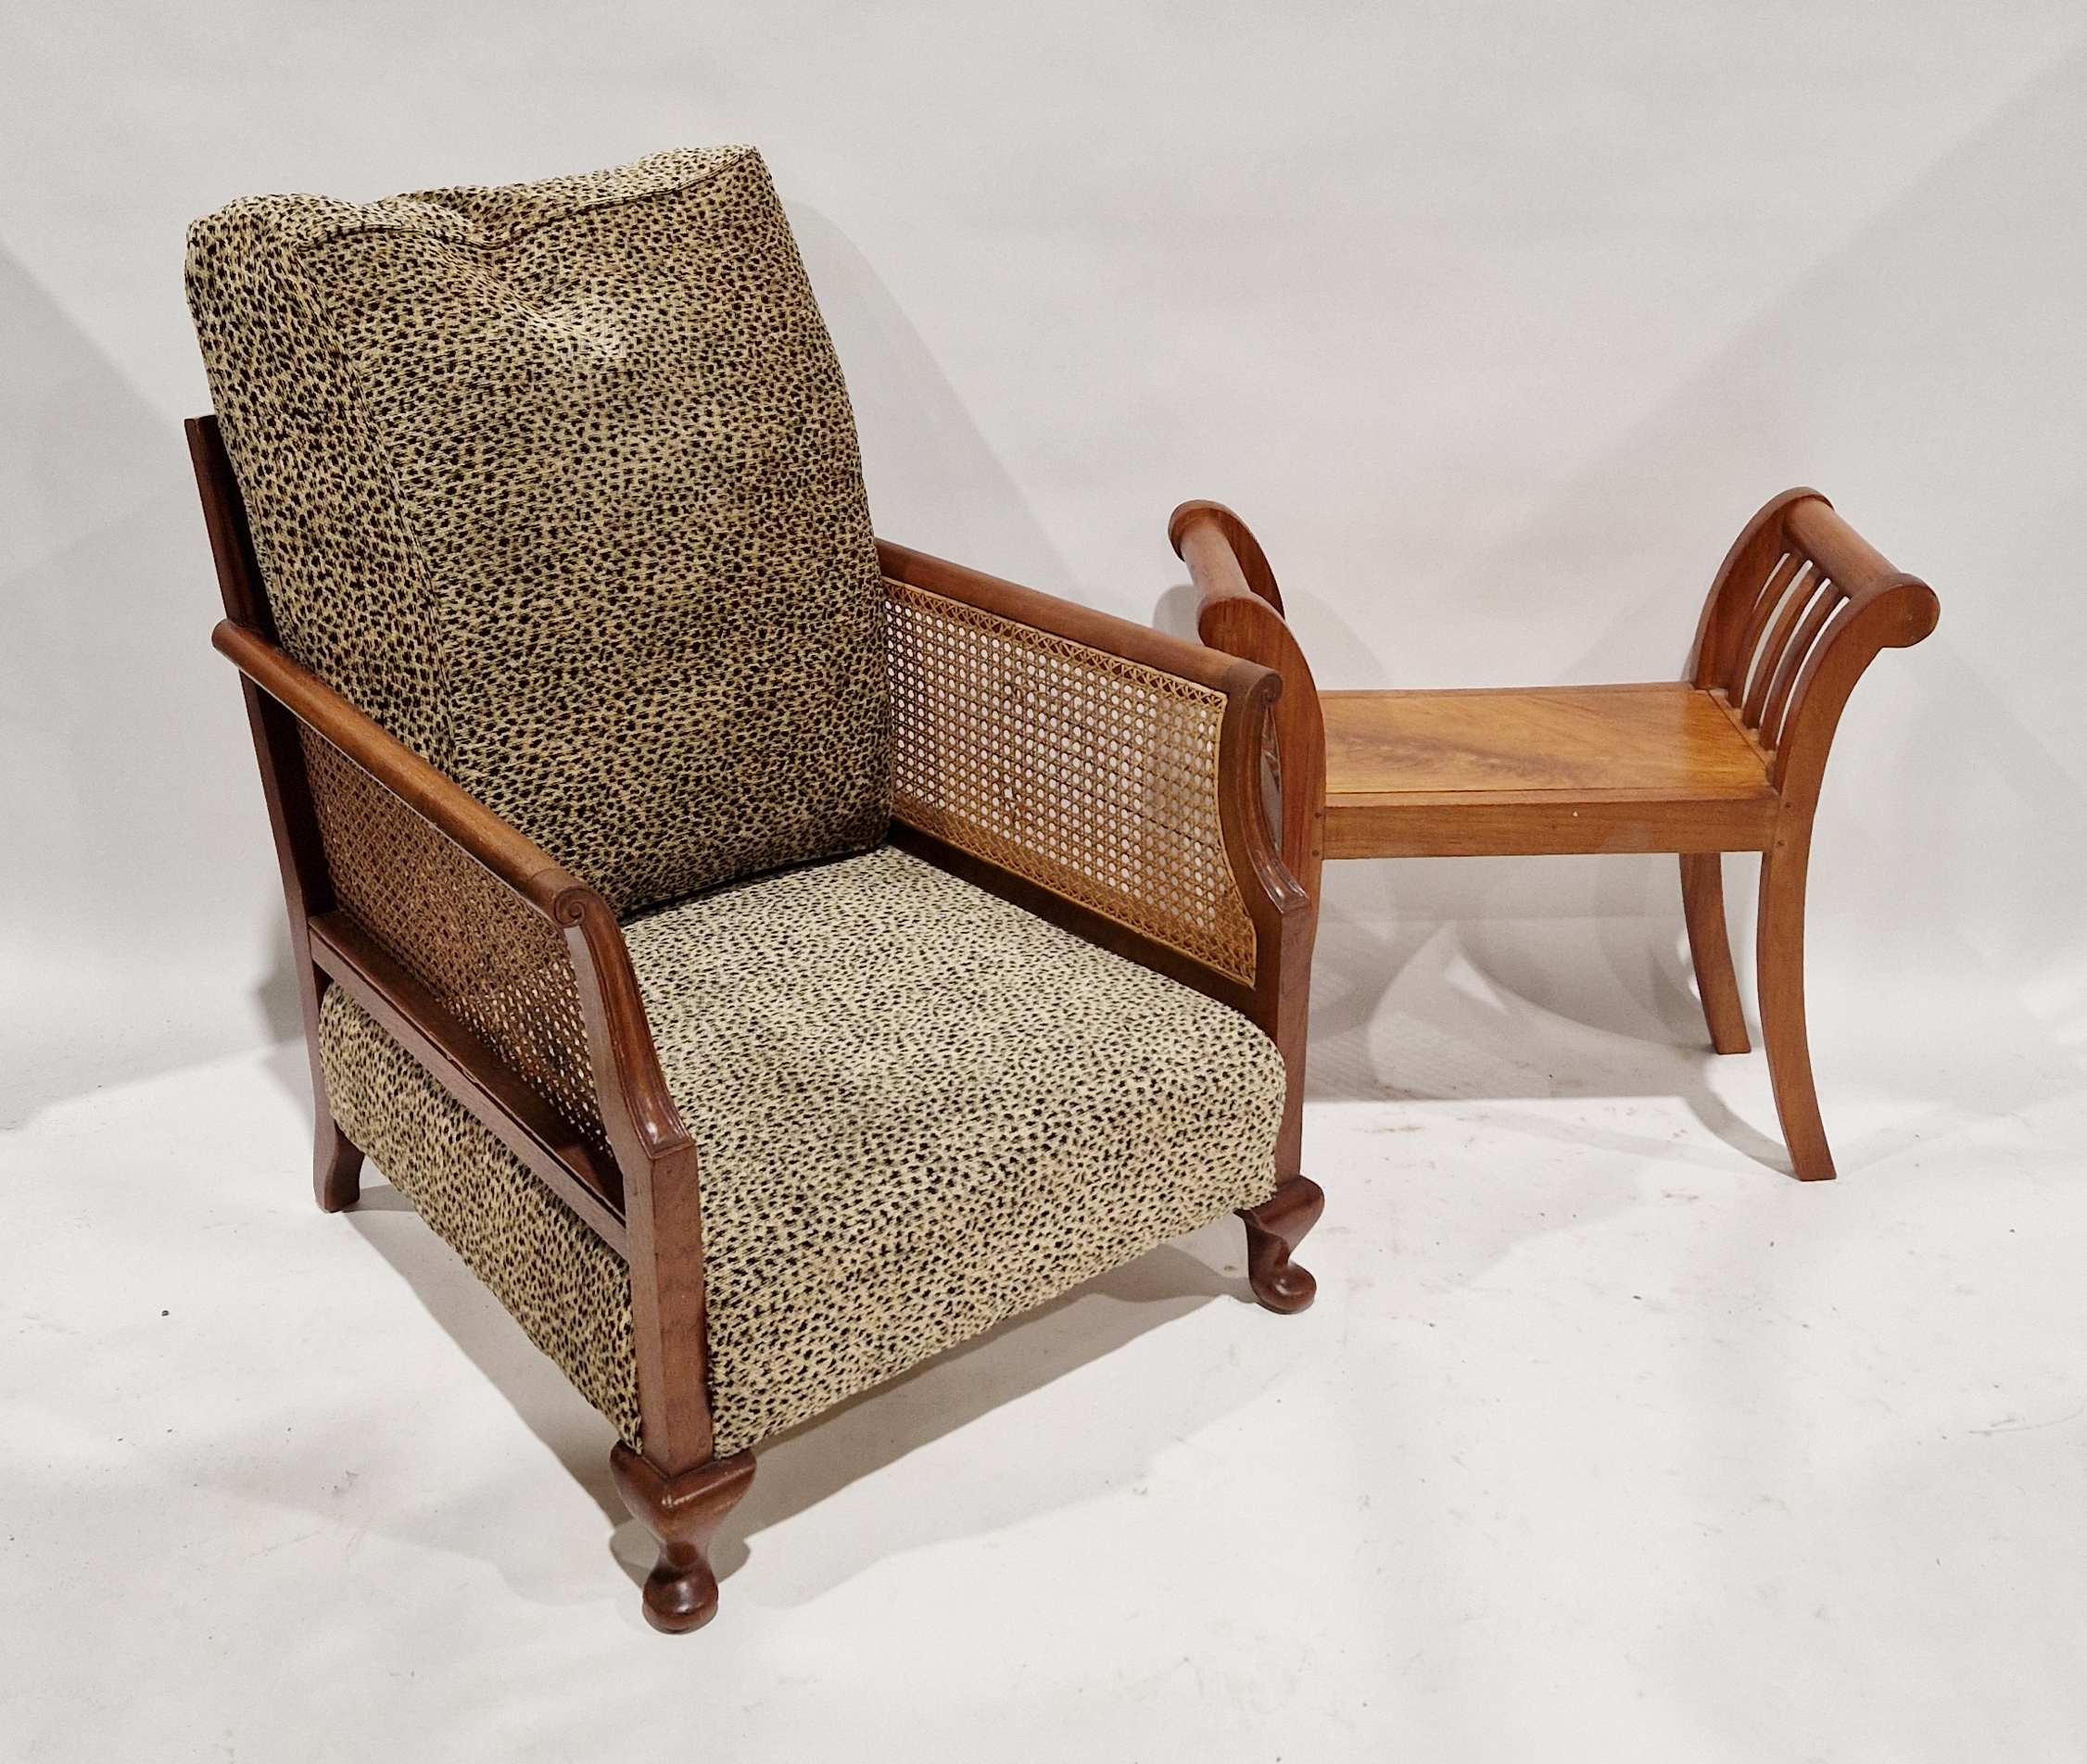 Bergere armchair with later leopard print upholstered seat base and cushion and a hardwood stool (2)